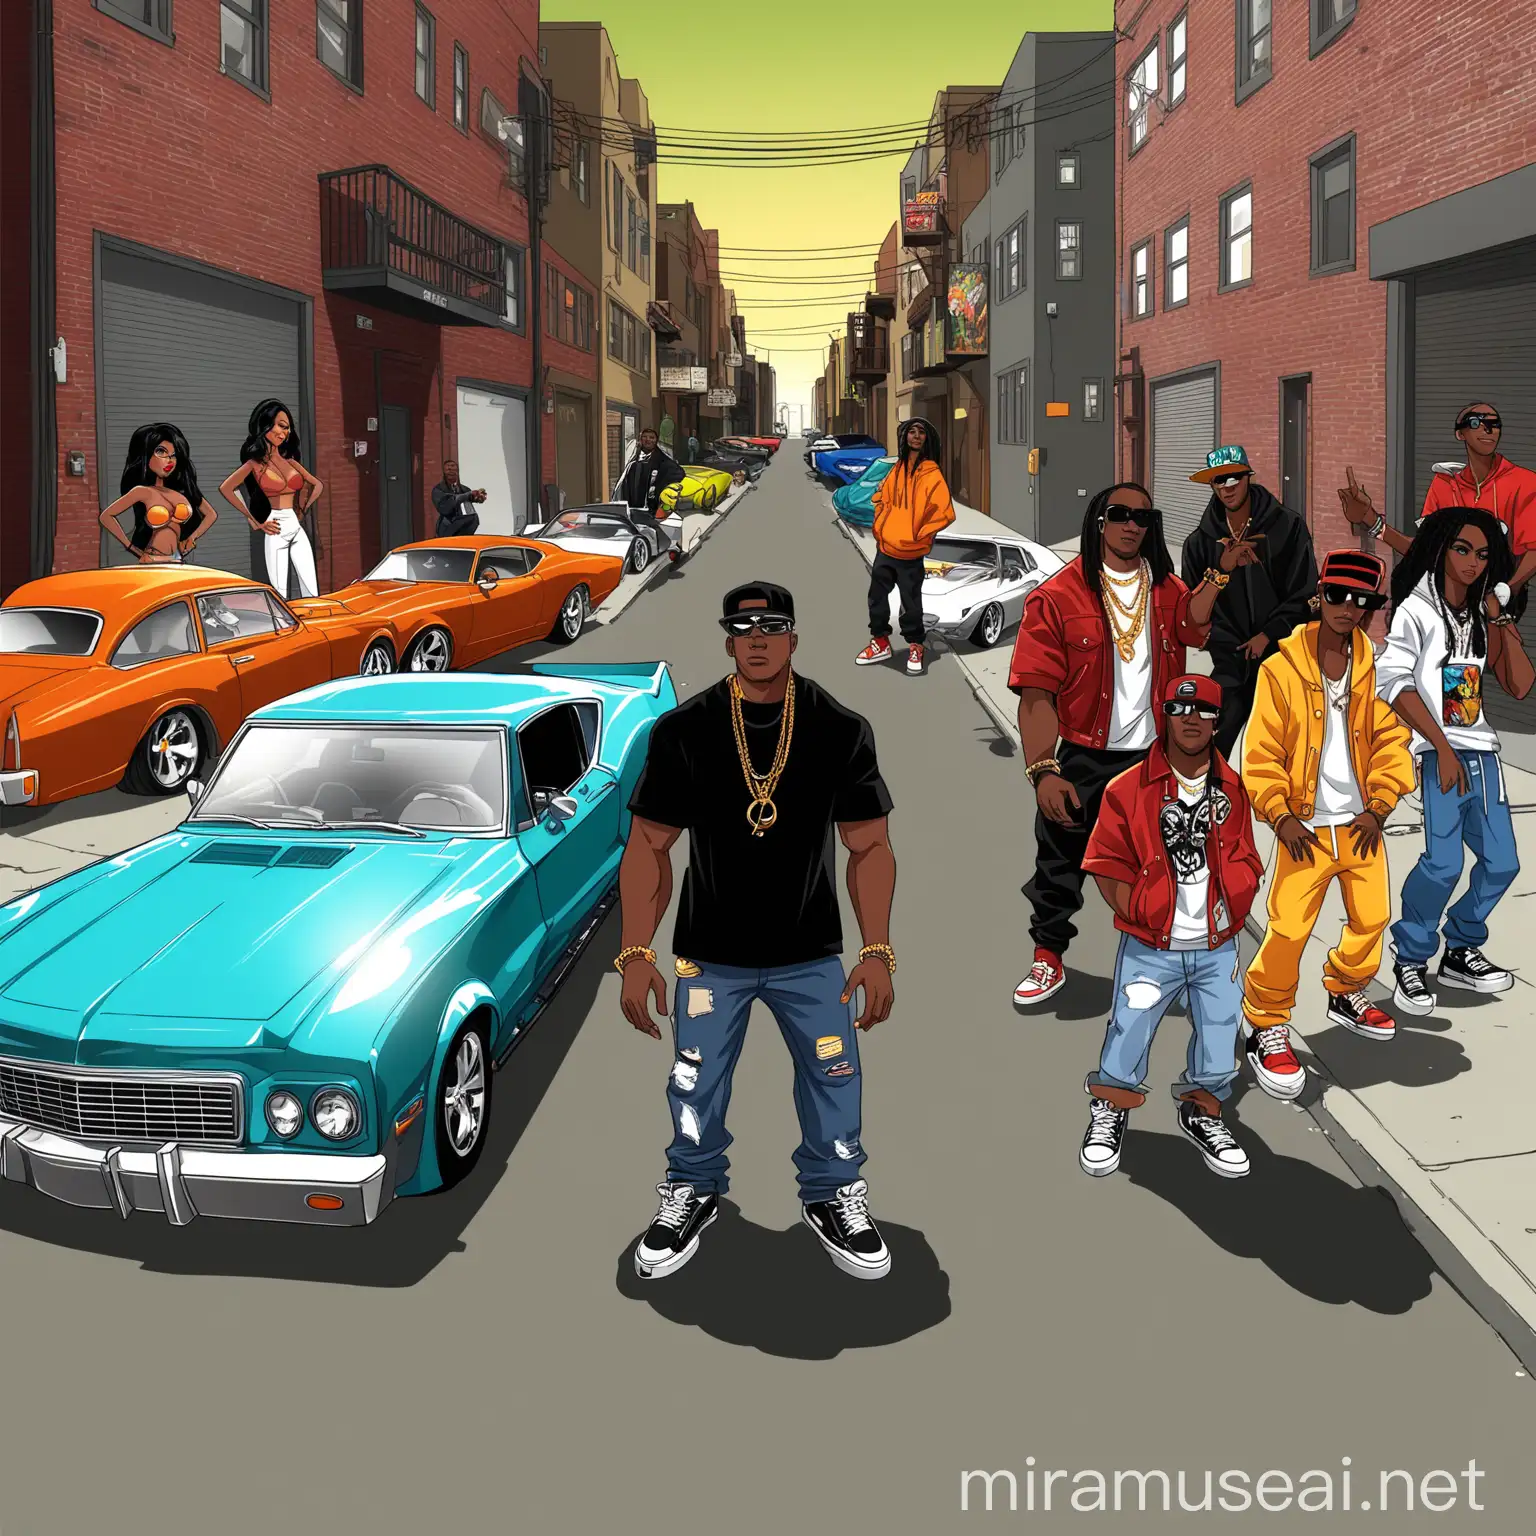 West Coast Hip Hop Album Cover African American Characters and Flashy Cars in Urban Alley